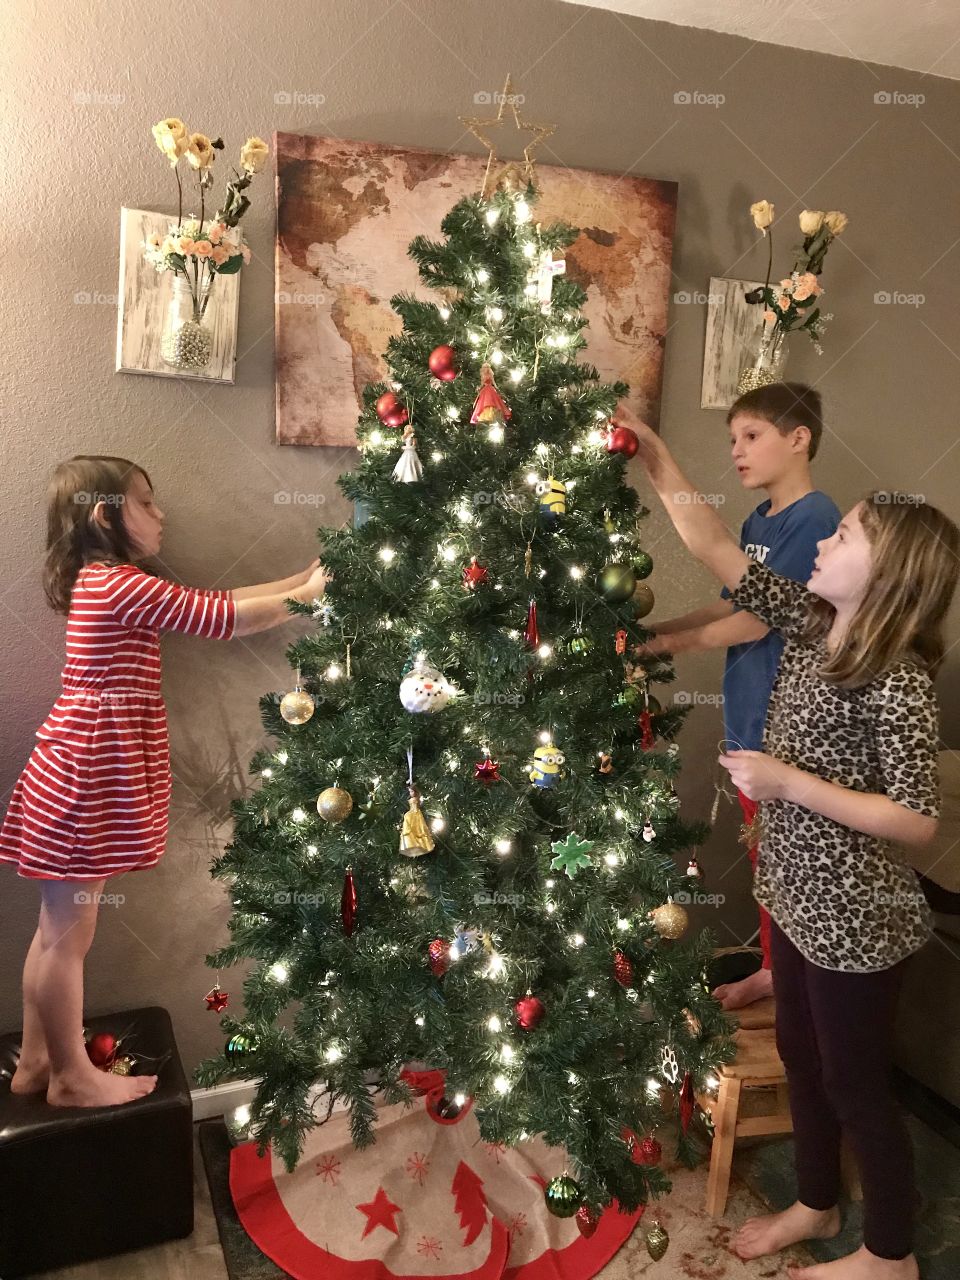 Decorating the Christmas tree with the kids.